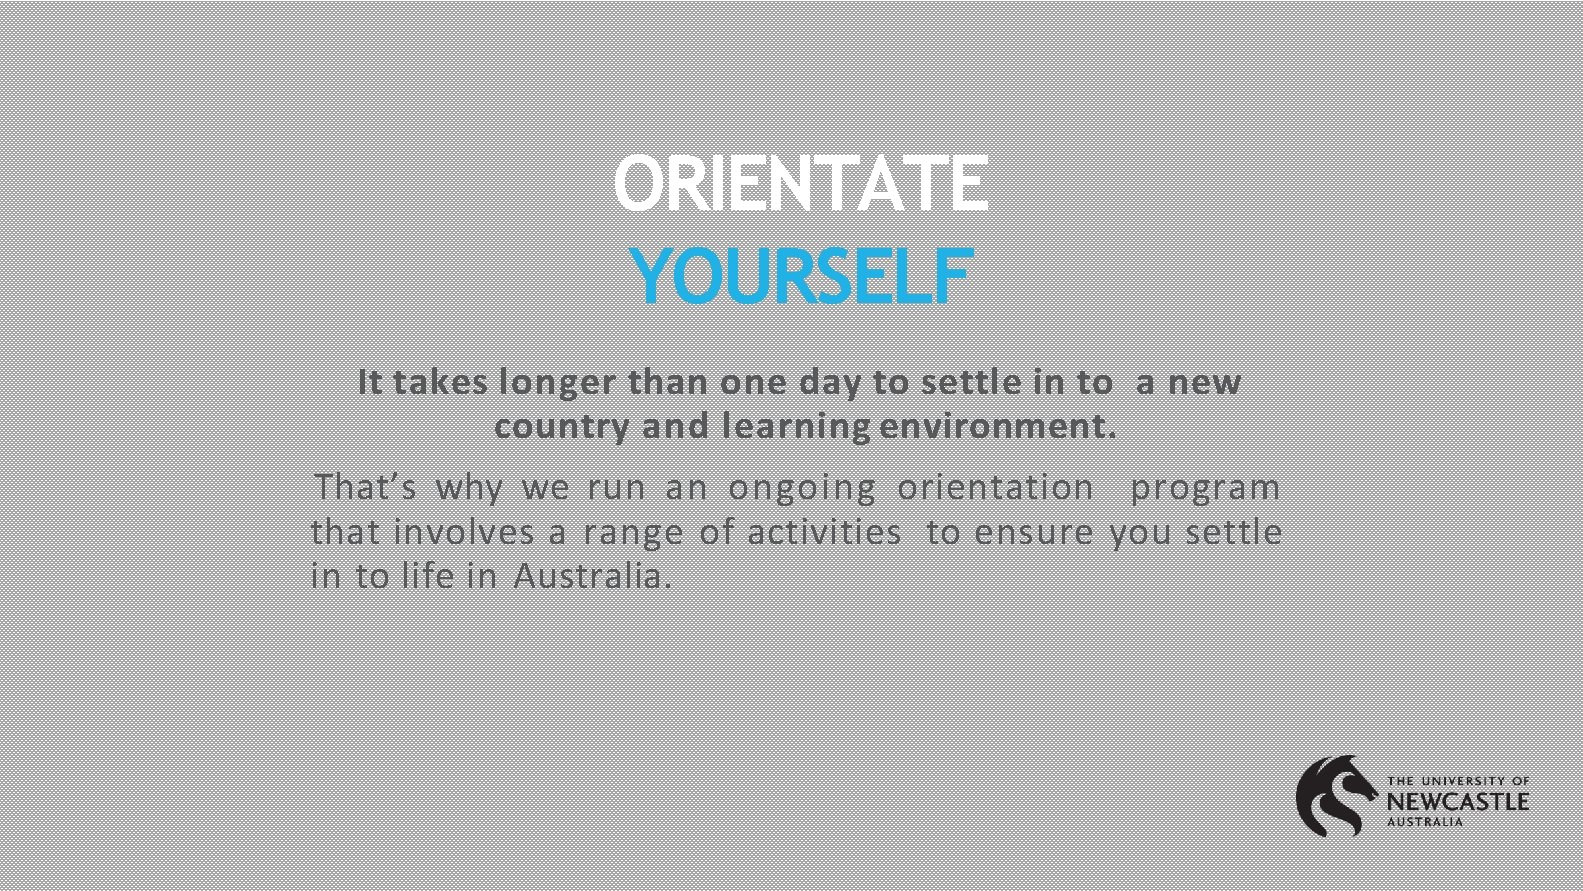 ORIENTATE YOURSELF It takes longer than one day to settle in to a new